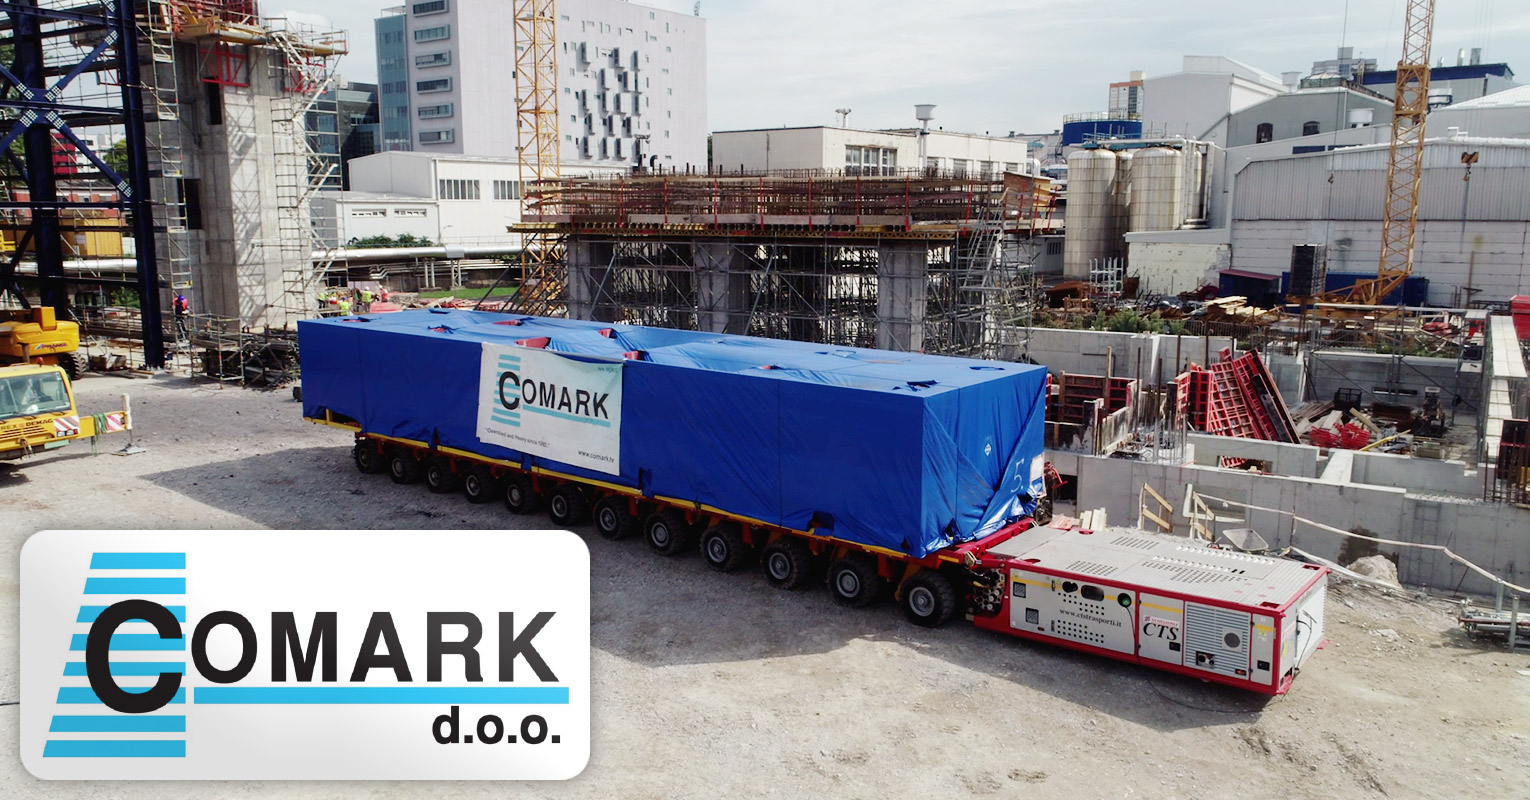 Comark Performed the Transport and Positioning of 8 x 165-tons Modules from Rijeka Port to Site via Comark's Own Depot and Warehouse